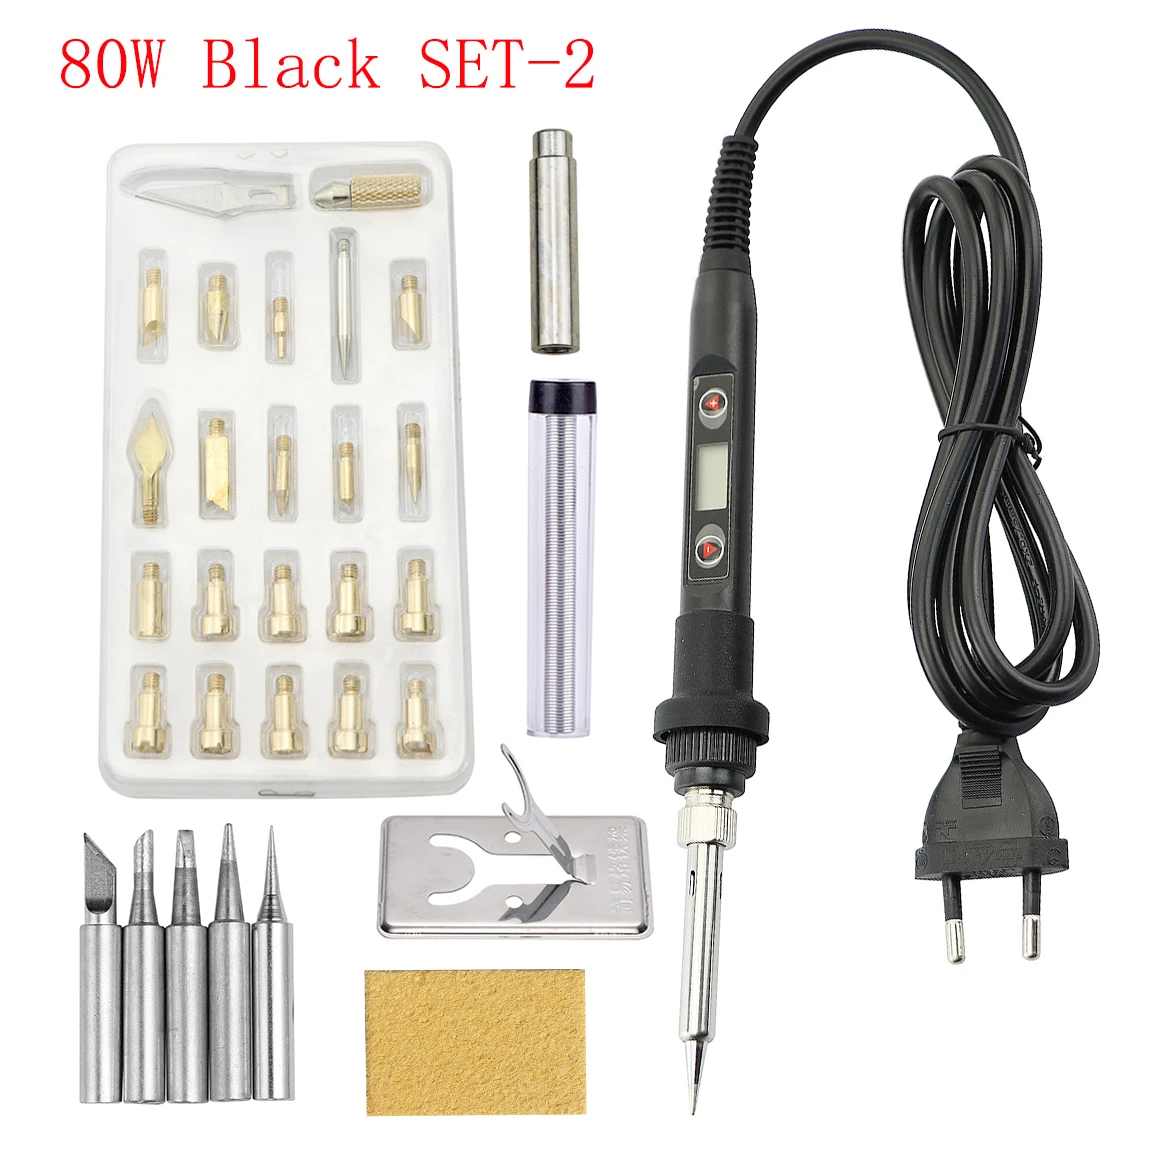 soldering irons & stations 22 in 1 Wood Embossing Burning Carving Pyrography Pen Tools Kit 60W 80W Adjustable Temperature Soldering Iron Hand Operated Set gas welding machine Welding Equipment